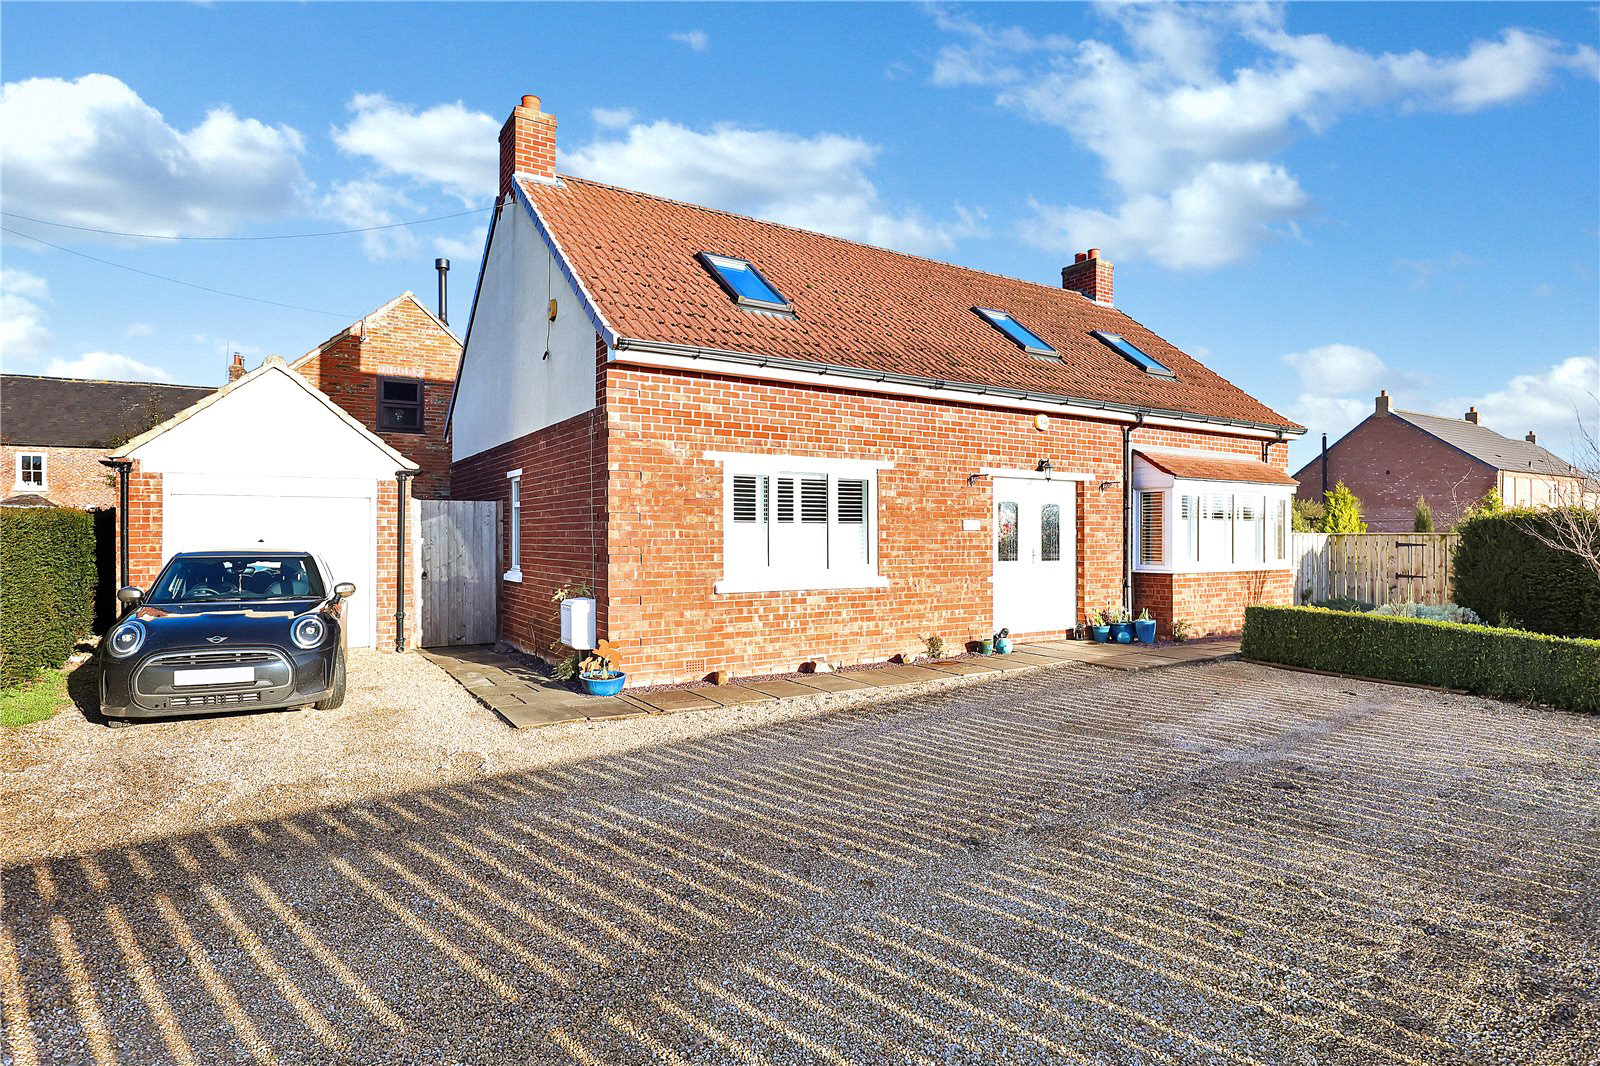 4 bed house for sale in Morton On Swale, Northallerton - Property Image 1